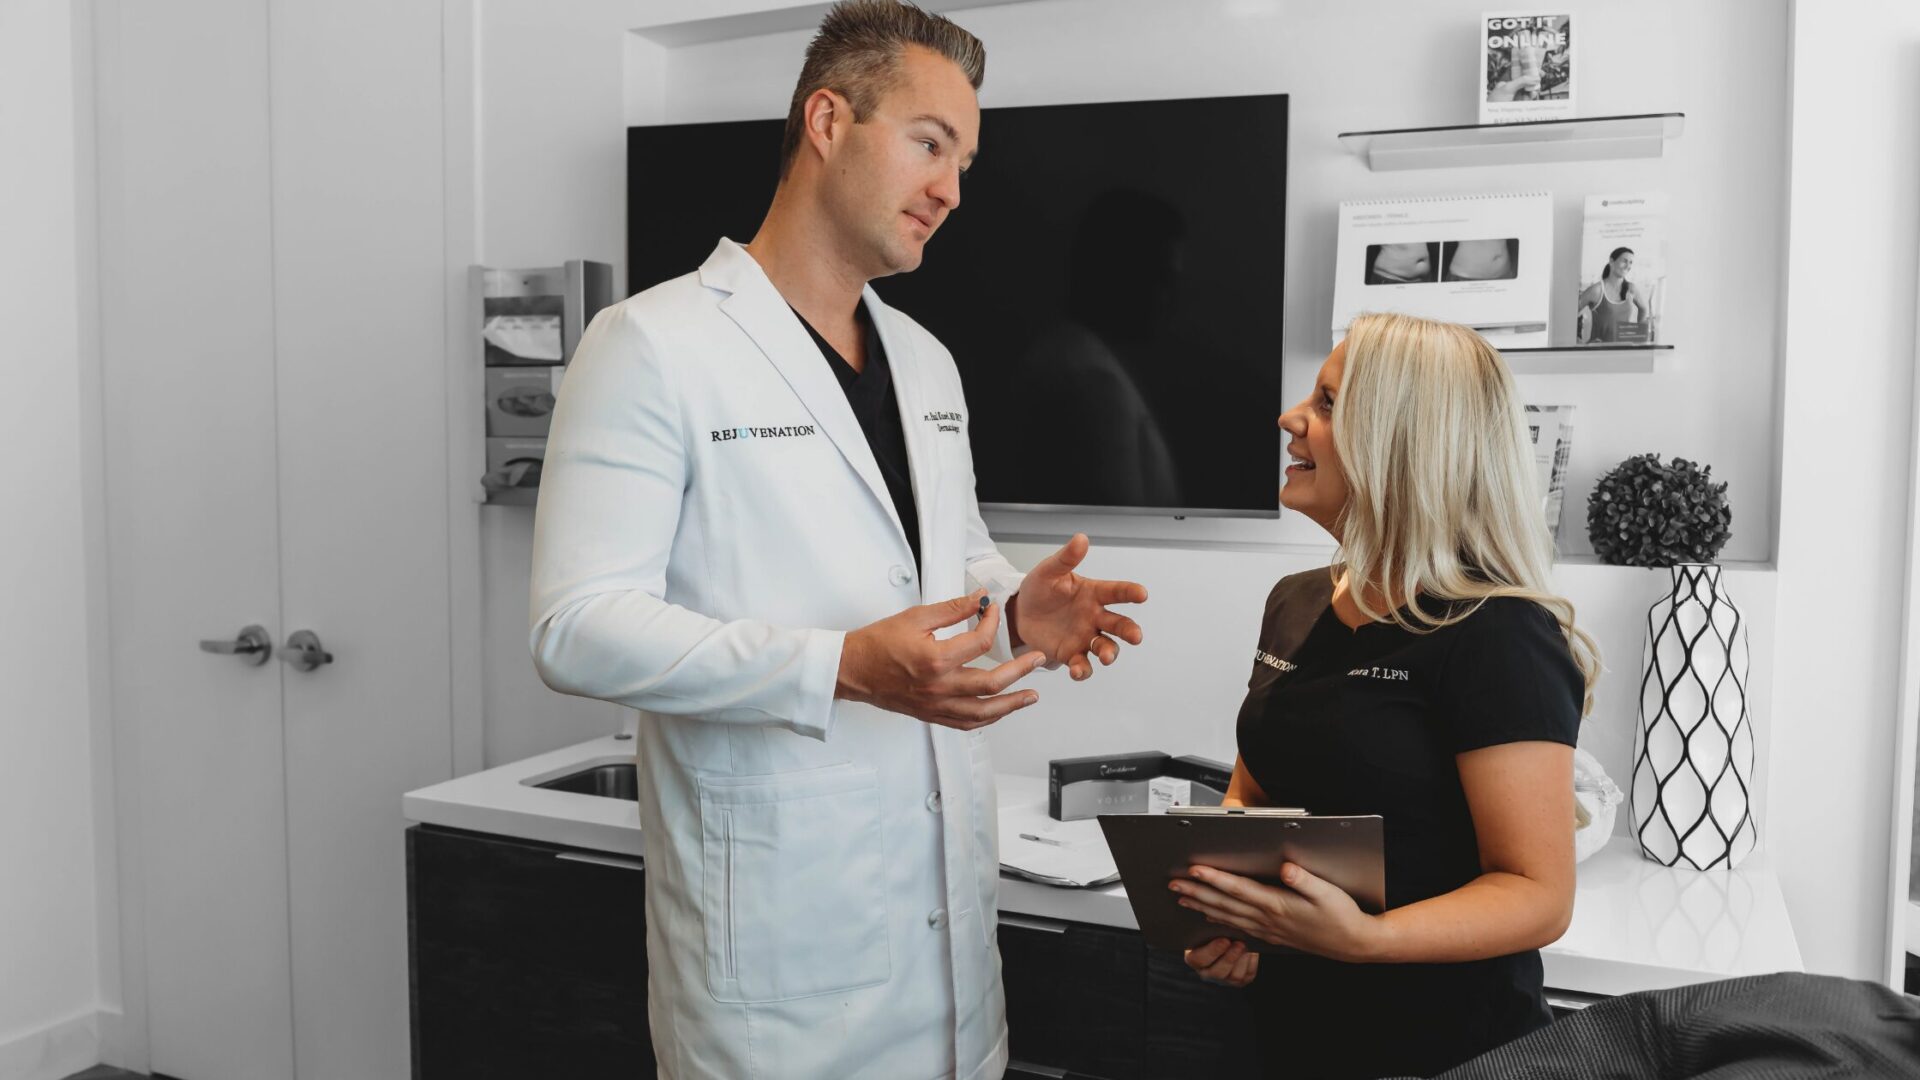 A medical director specializing in dermatology is pictured alongside one of his employees. They are engaged in discussion, reviewing patient cases and discussing clinic operations. 